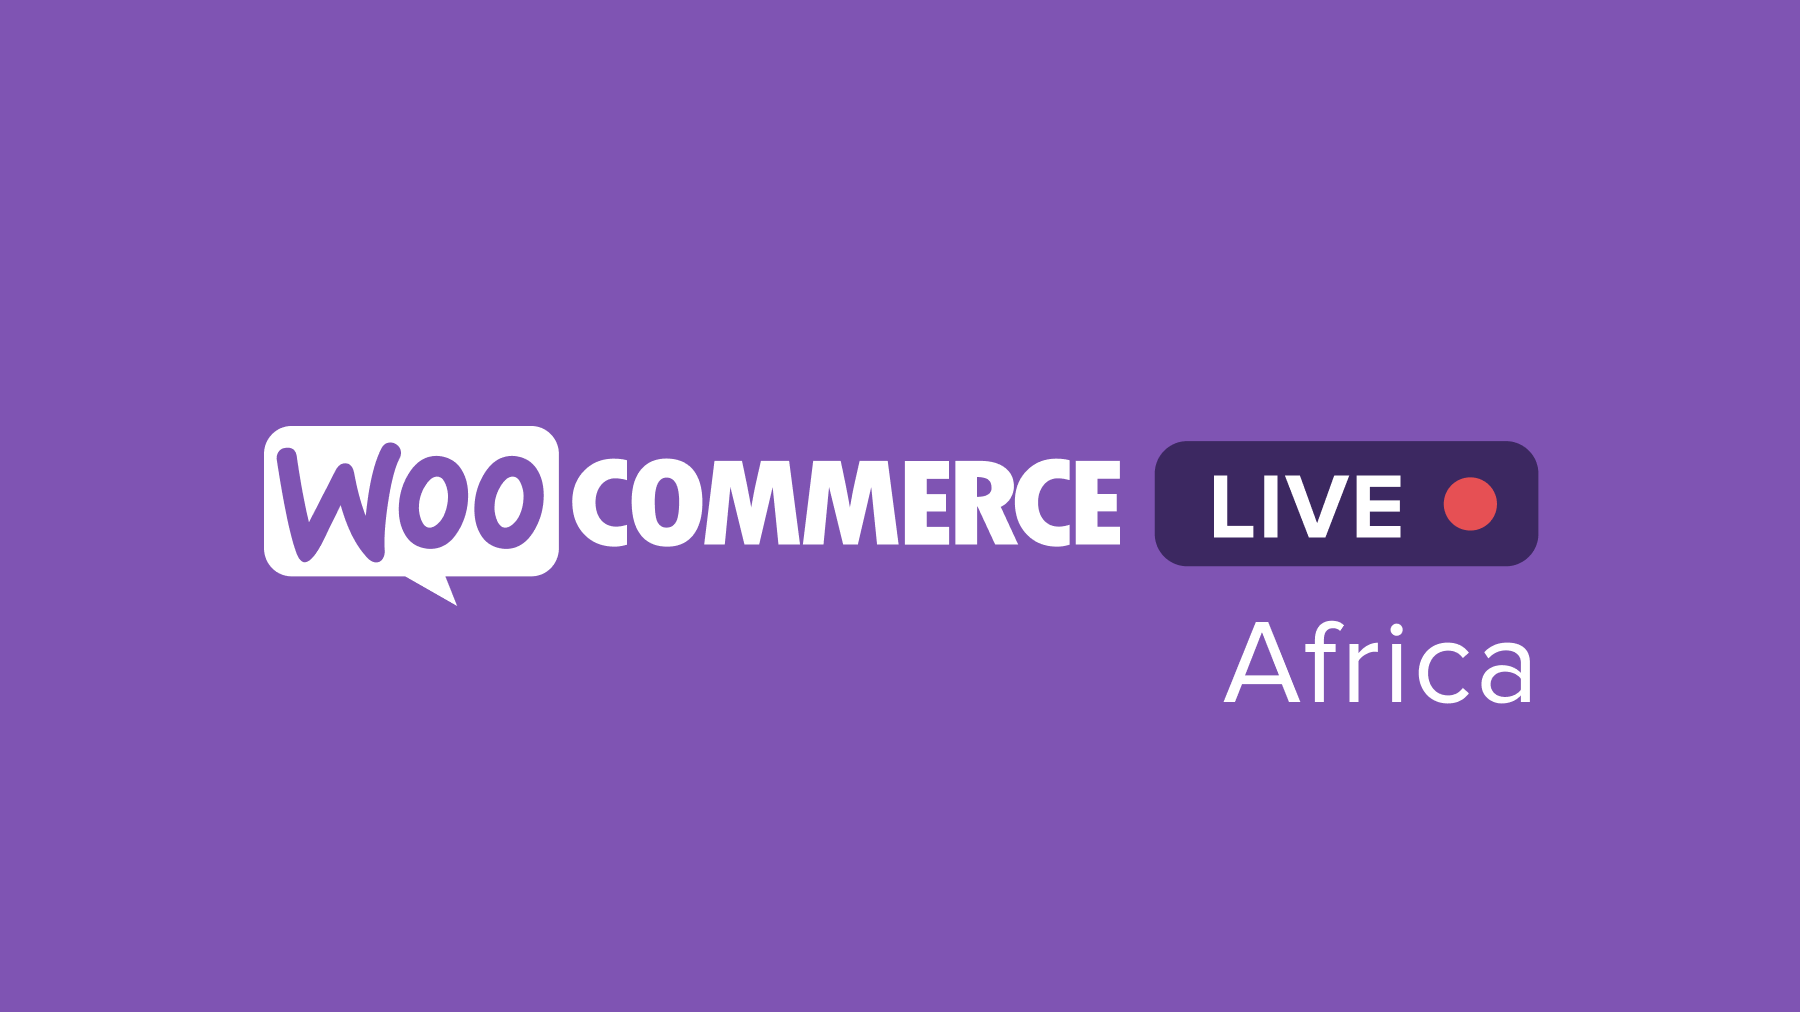 WooCommerce Live Africa to Host First Online Meetup Event, March 18, 2021